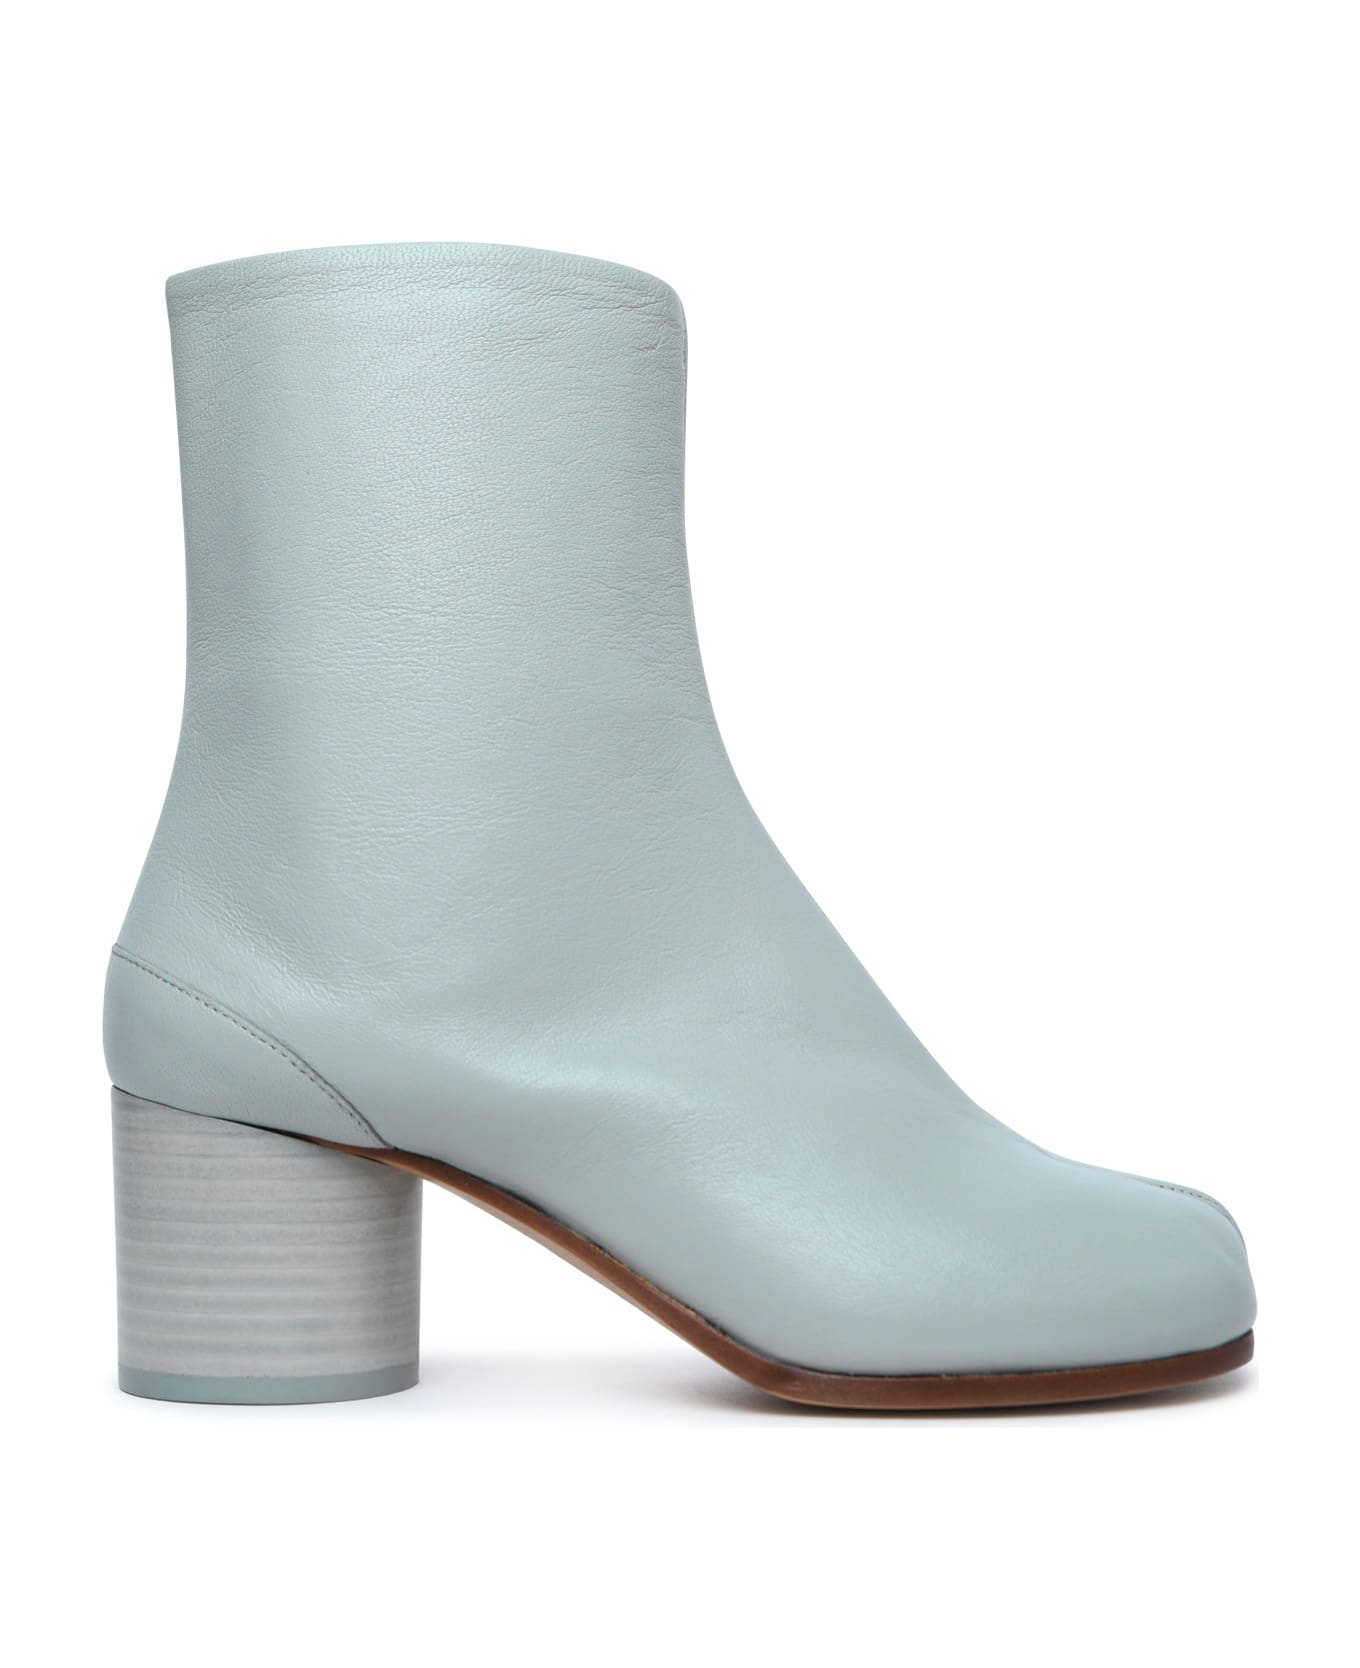 Maison Margiela 'tabi' Green Anise Leather Ankle Boots - Anisette ブーツ